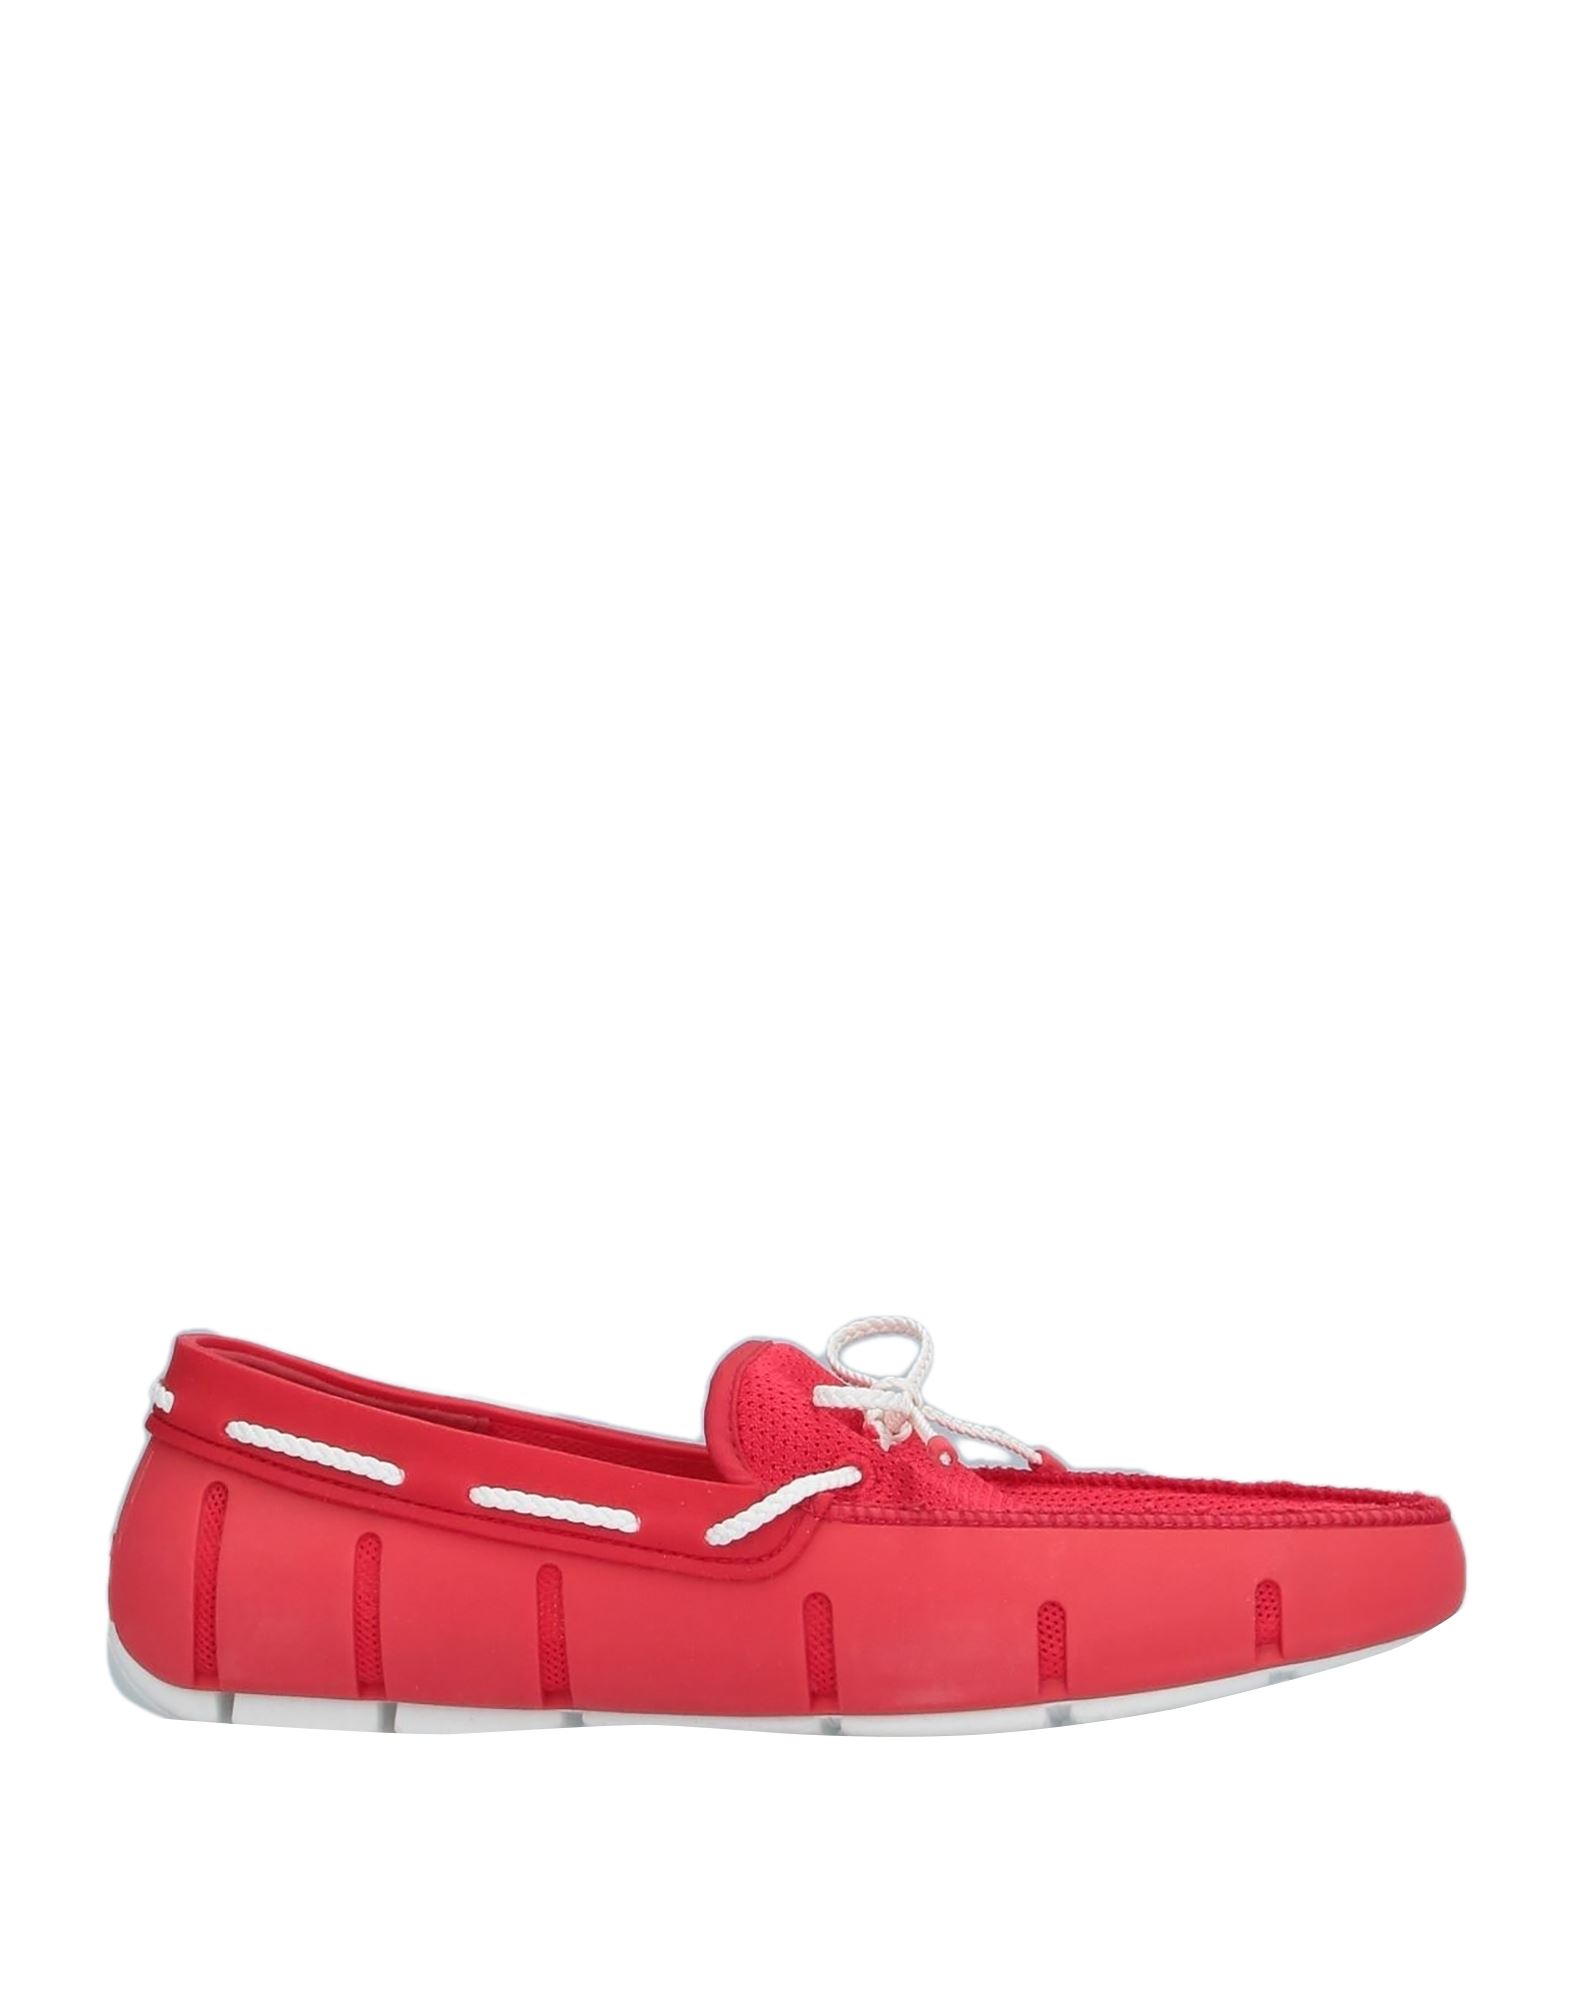 Swims Loafers In Tomato Red